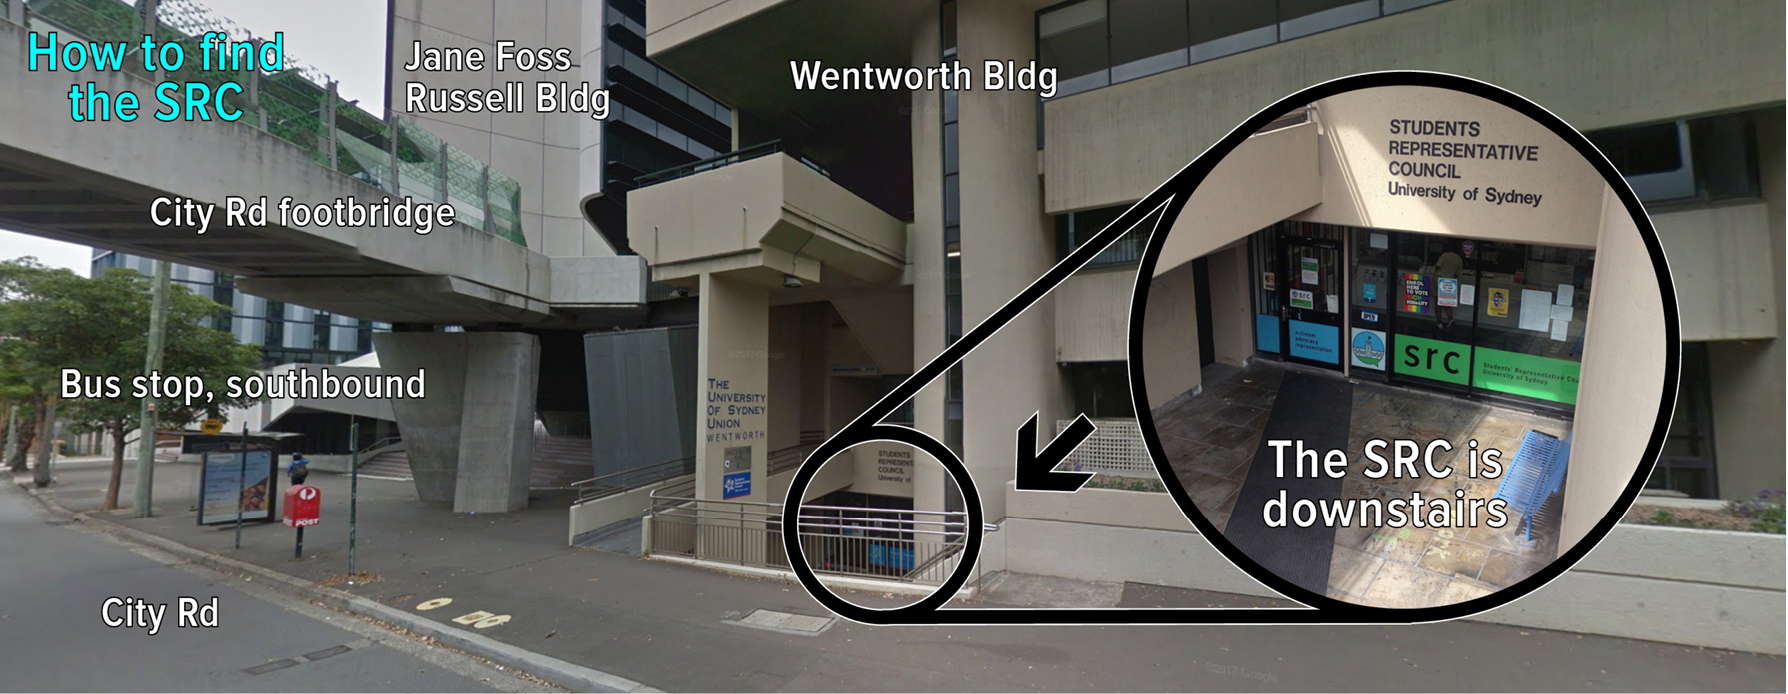 Image of front of Wentworth Building highlighting entrance to the SRC